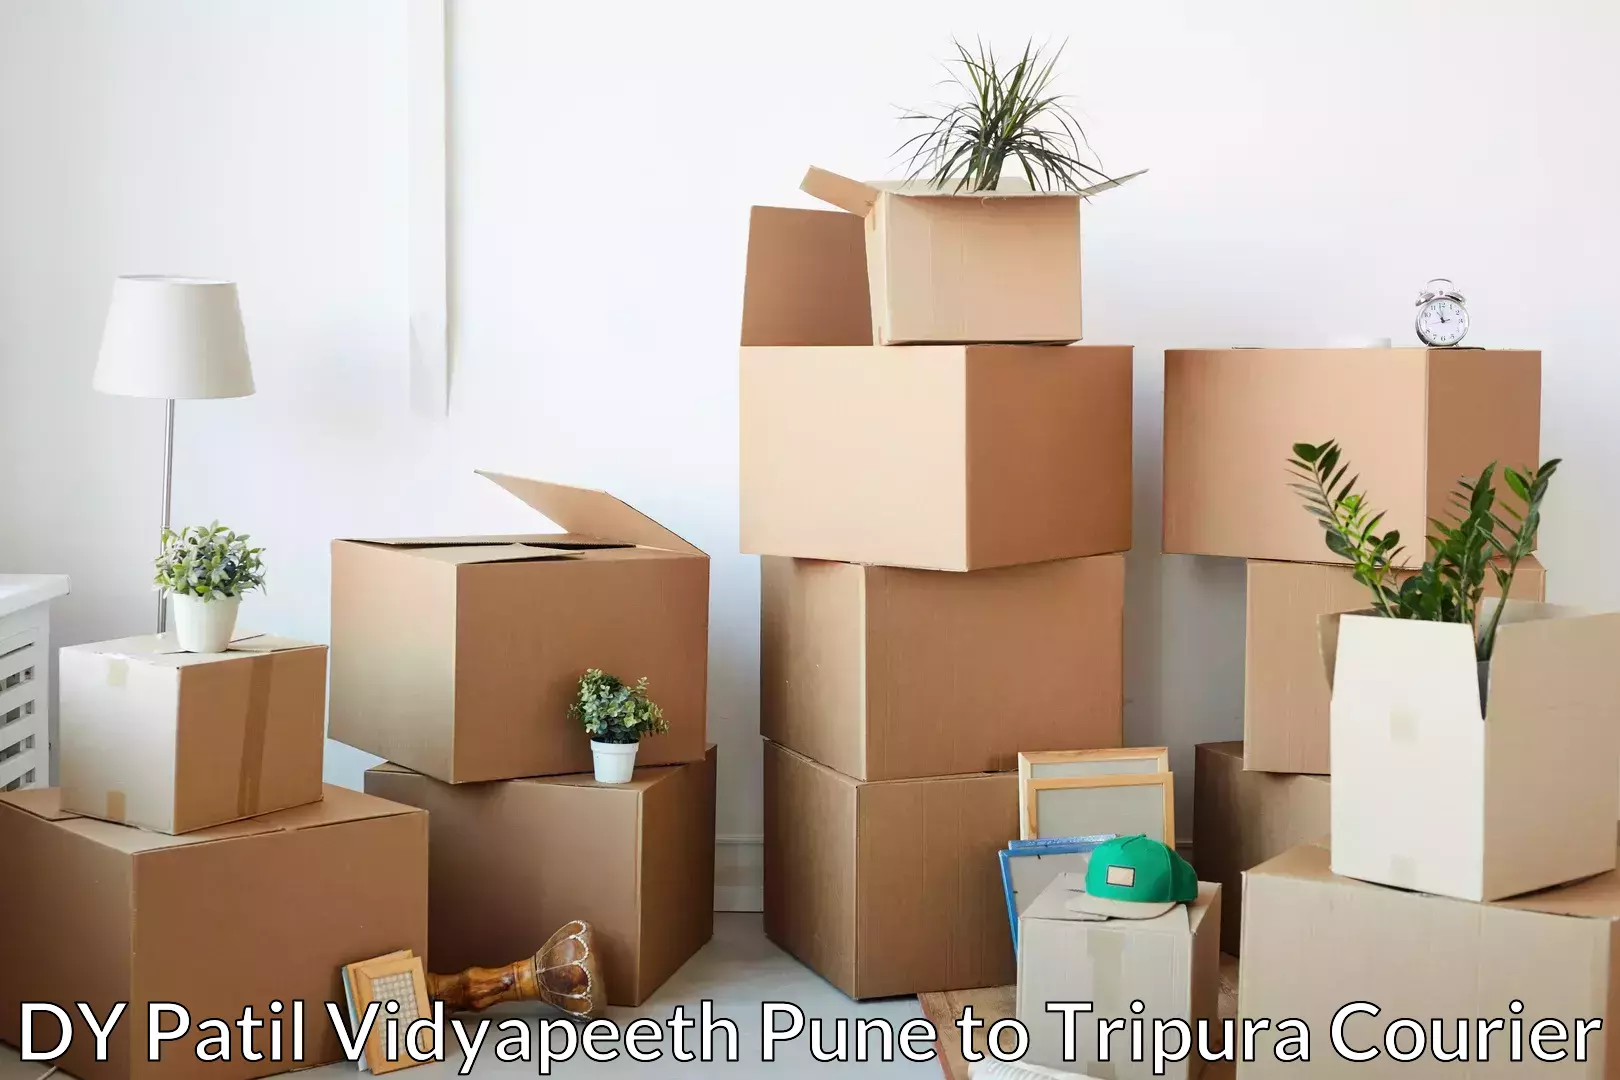 Hassle-free relocation DY Patil Vidyapeeth Pune to Aambasa